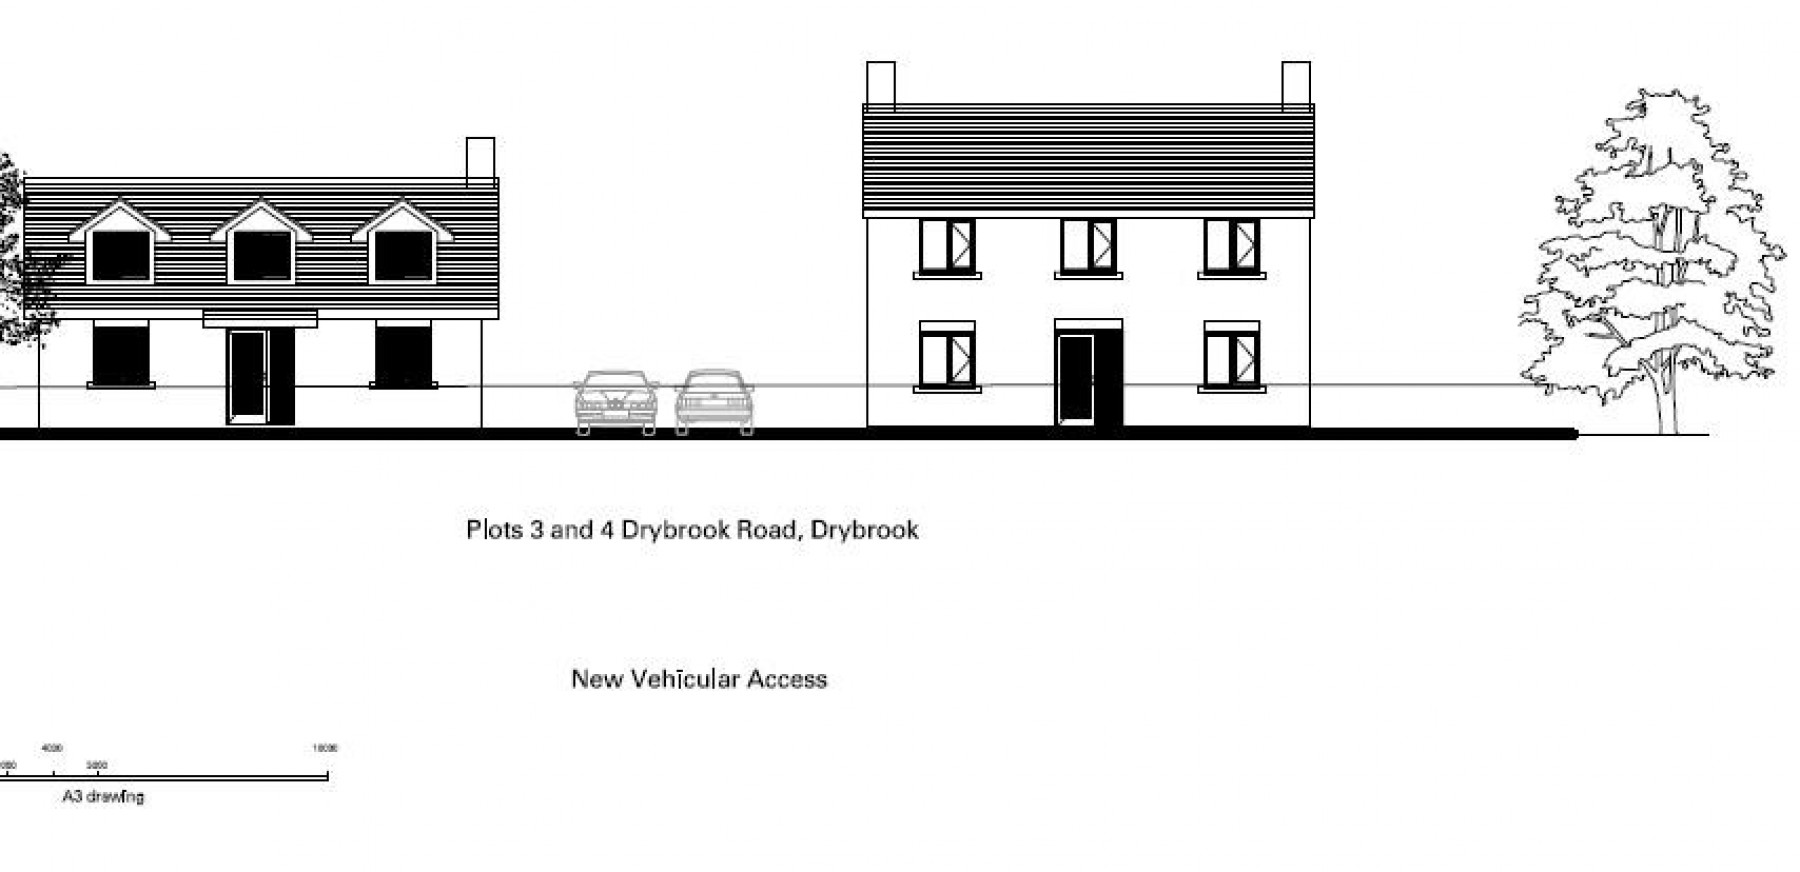 Images for PLANNING GRANTED - 4 DETACHED HOUSE - DRYBROOK